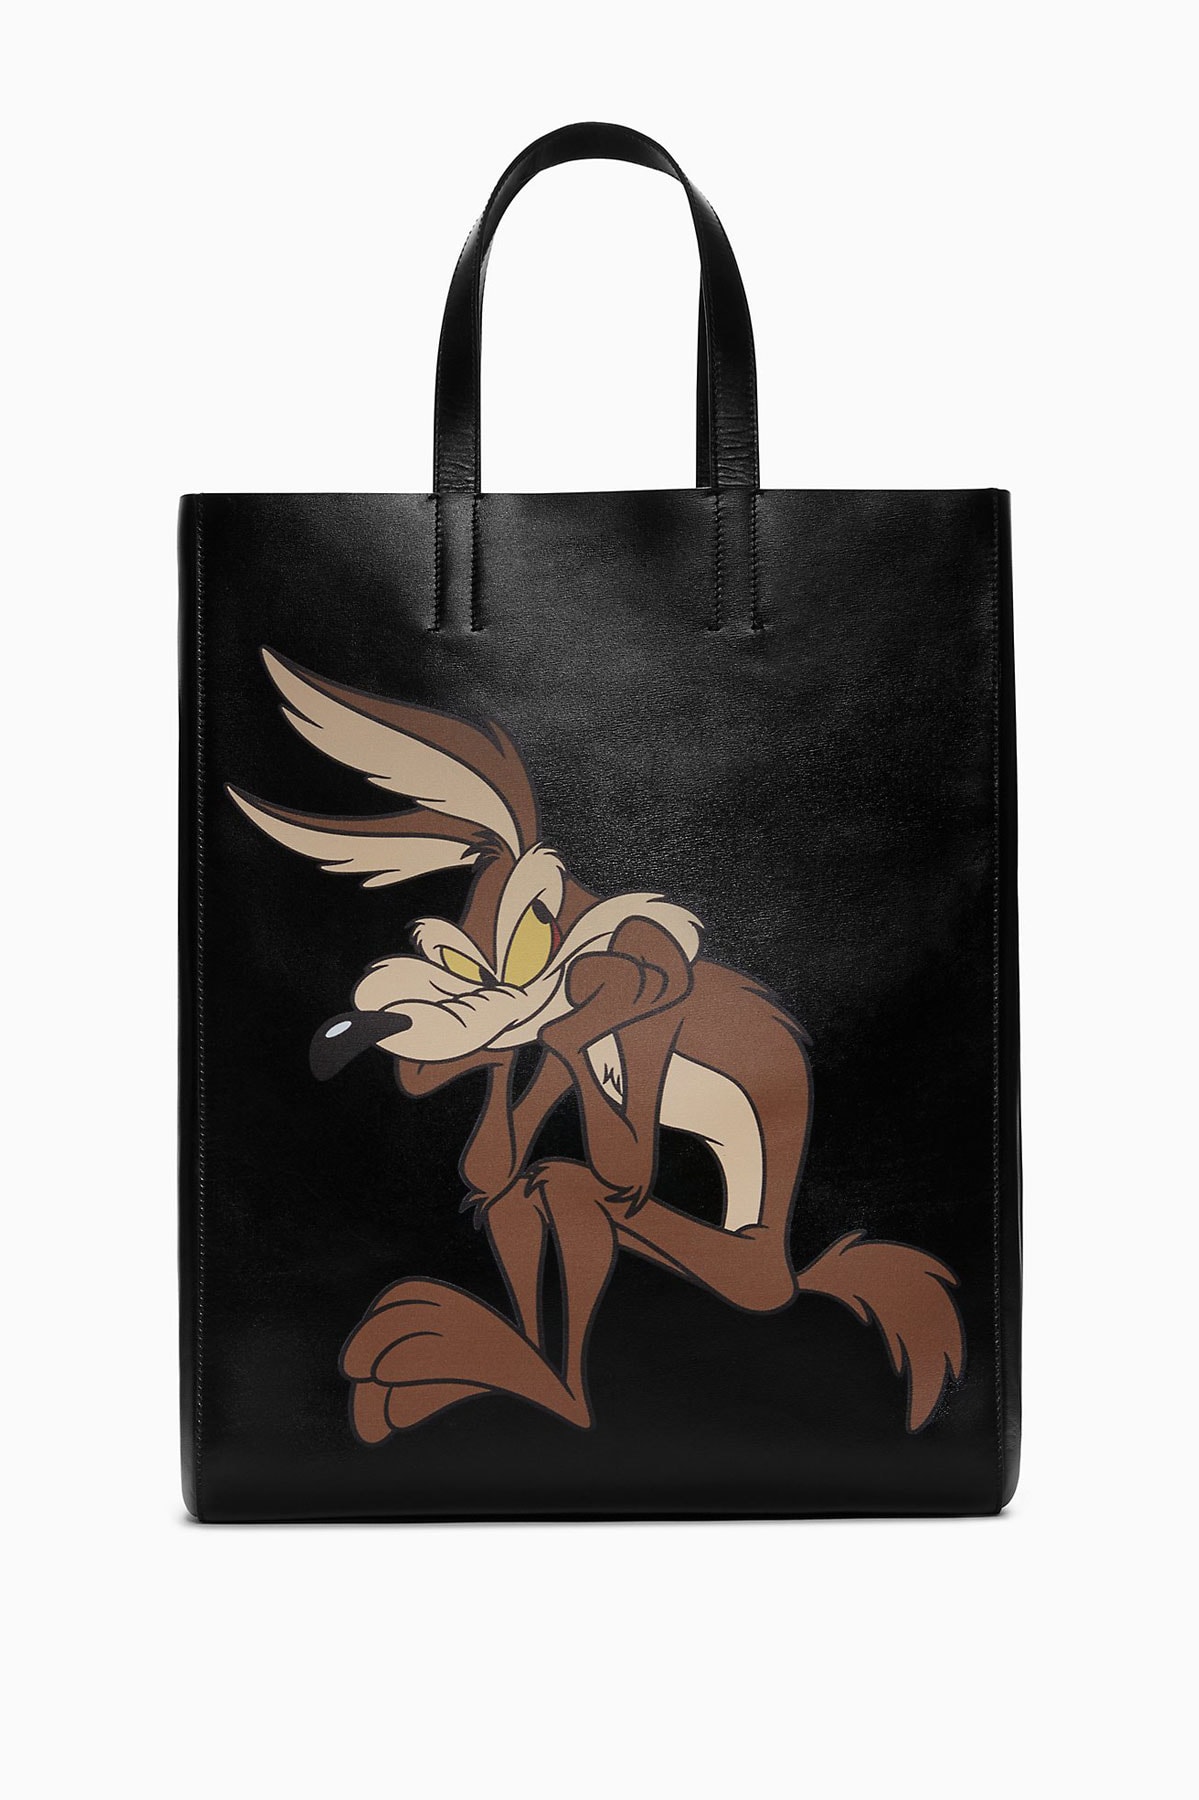 calvin klein 205w39nyc wile e coyote the roadrunner looney tunes leather bags zipper wallet card case intarsia reverse knit sweater collaboration black cream blue fall winter 2018 drop release date pre order buy sale shop sell